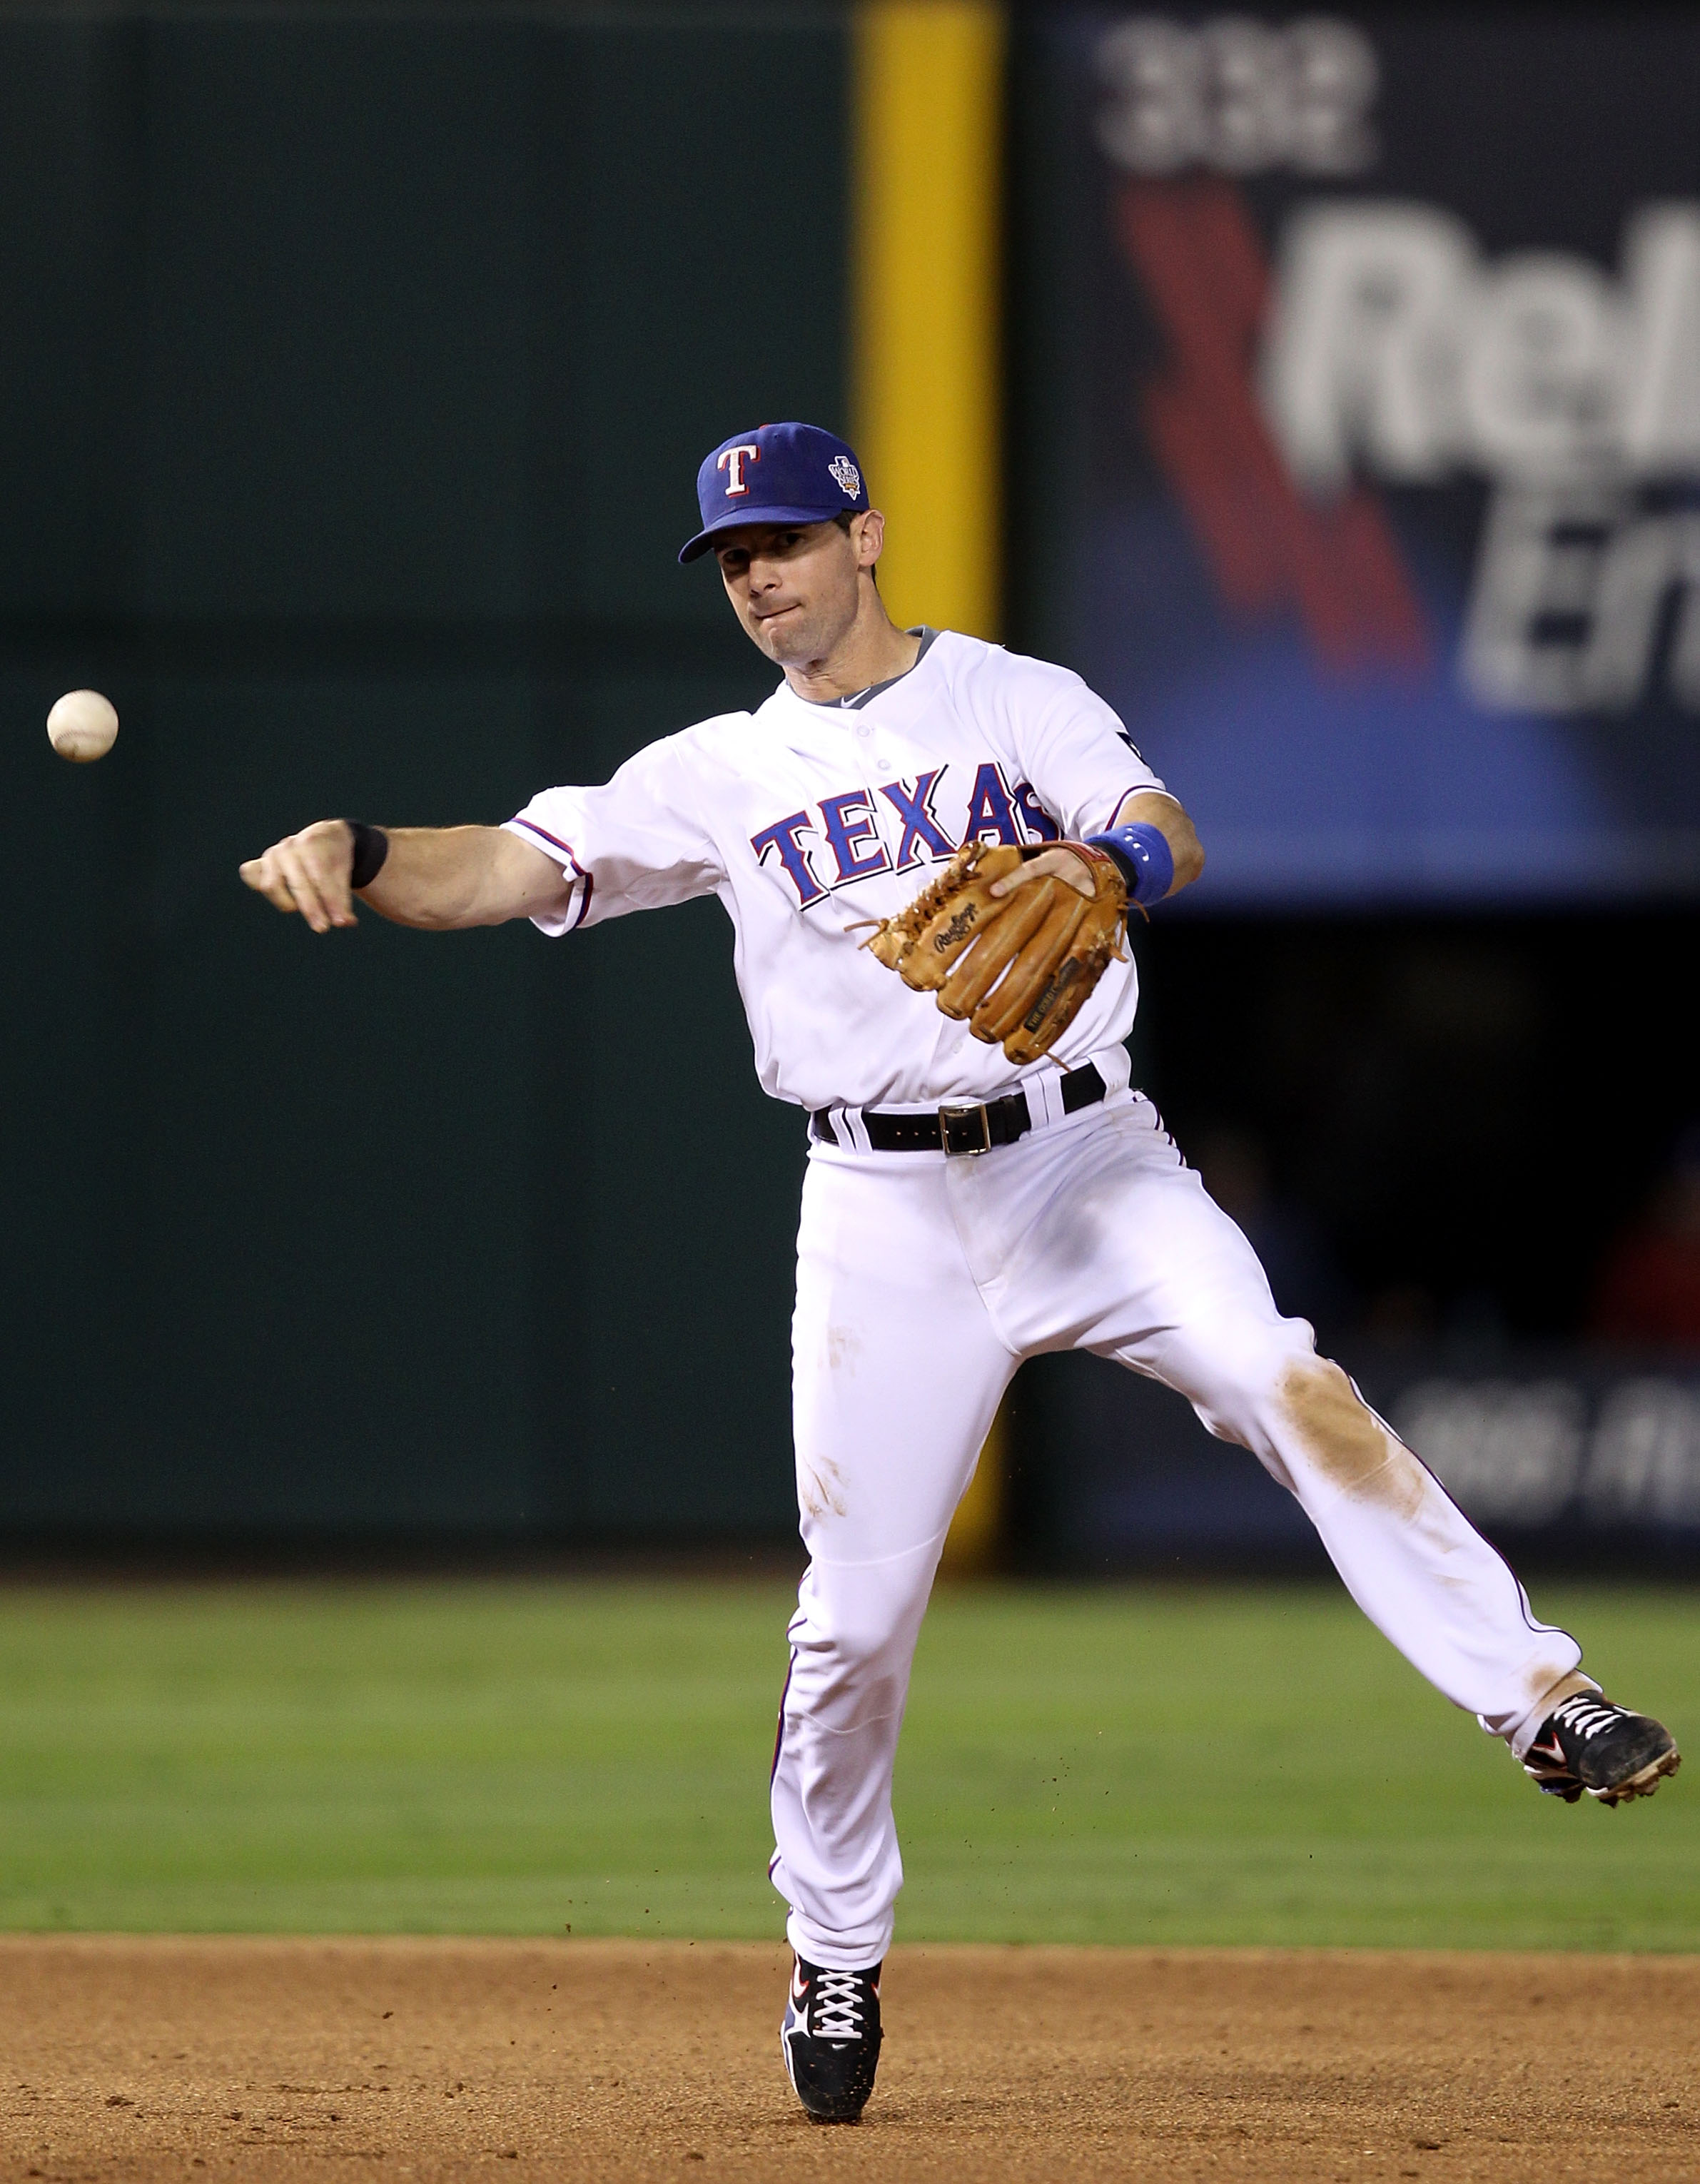 ARLINGTON, TX - OCTOBER 31:  Michael Young #10 of the Texas Rangers throws to first for the out against the San Francisco Giants in Game Four of the 2010 MLB World Series at Rangers Ballpark in Arlington on October 31, 2010 in Arlington, Texas.  (Photo by